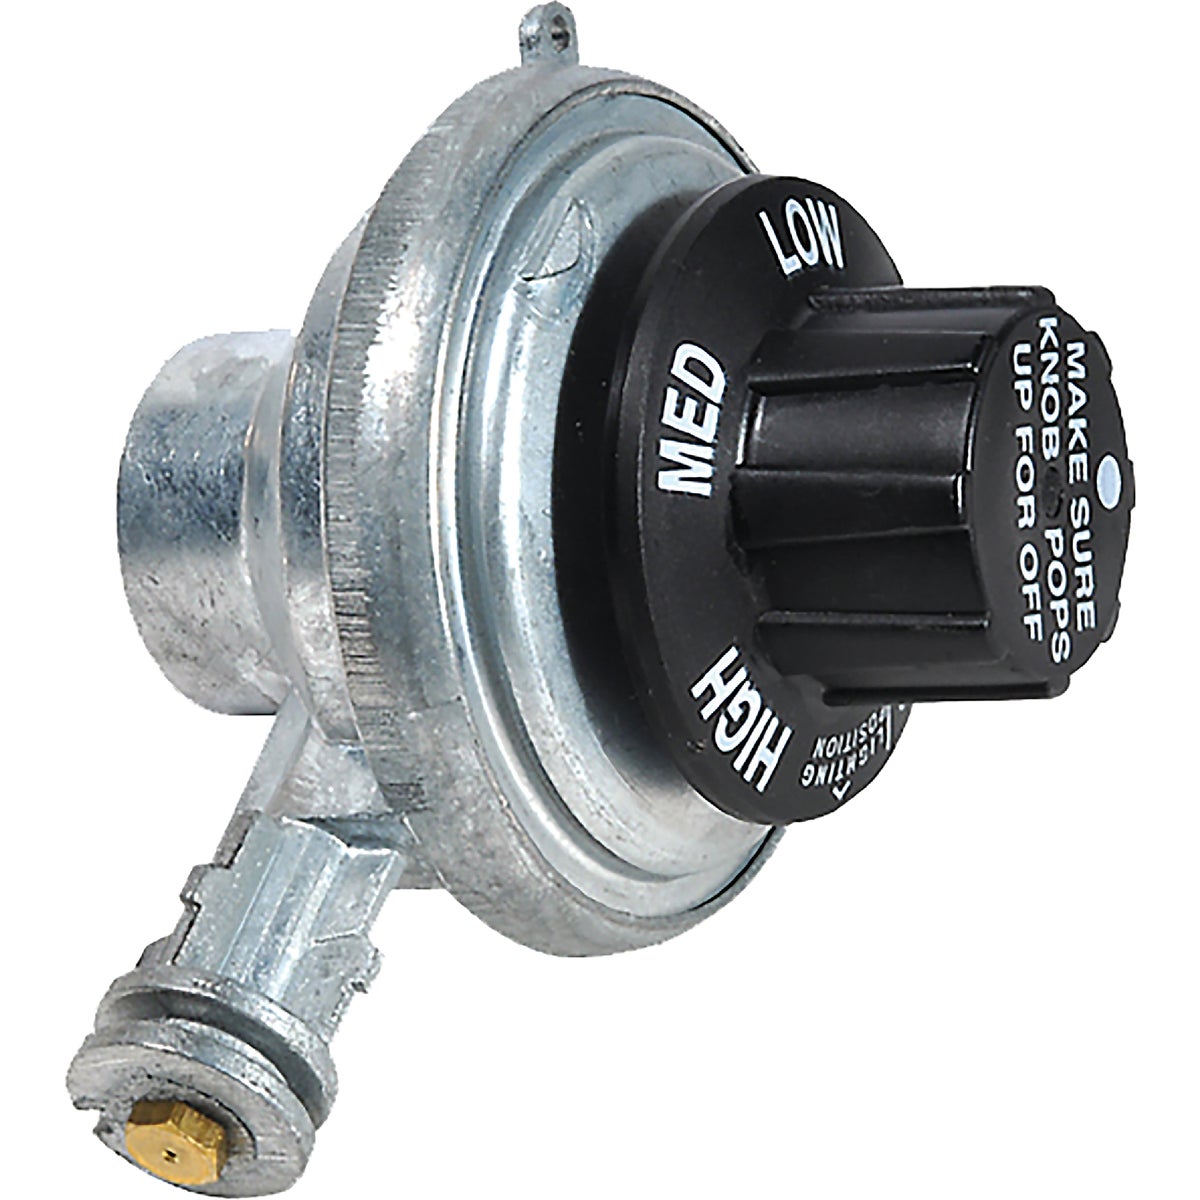 Item 489360, Portable propane tabletop regulator can be used with most tabletop grills.